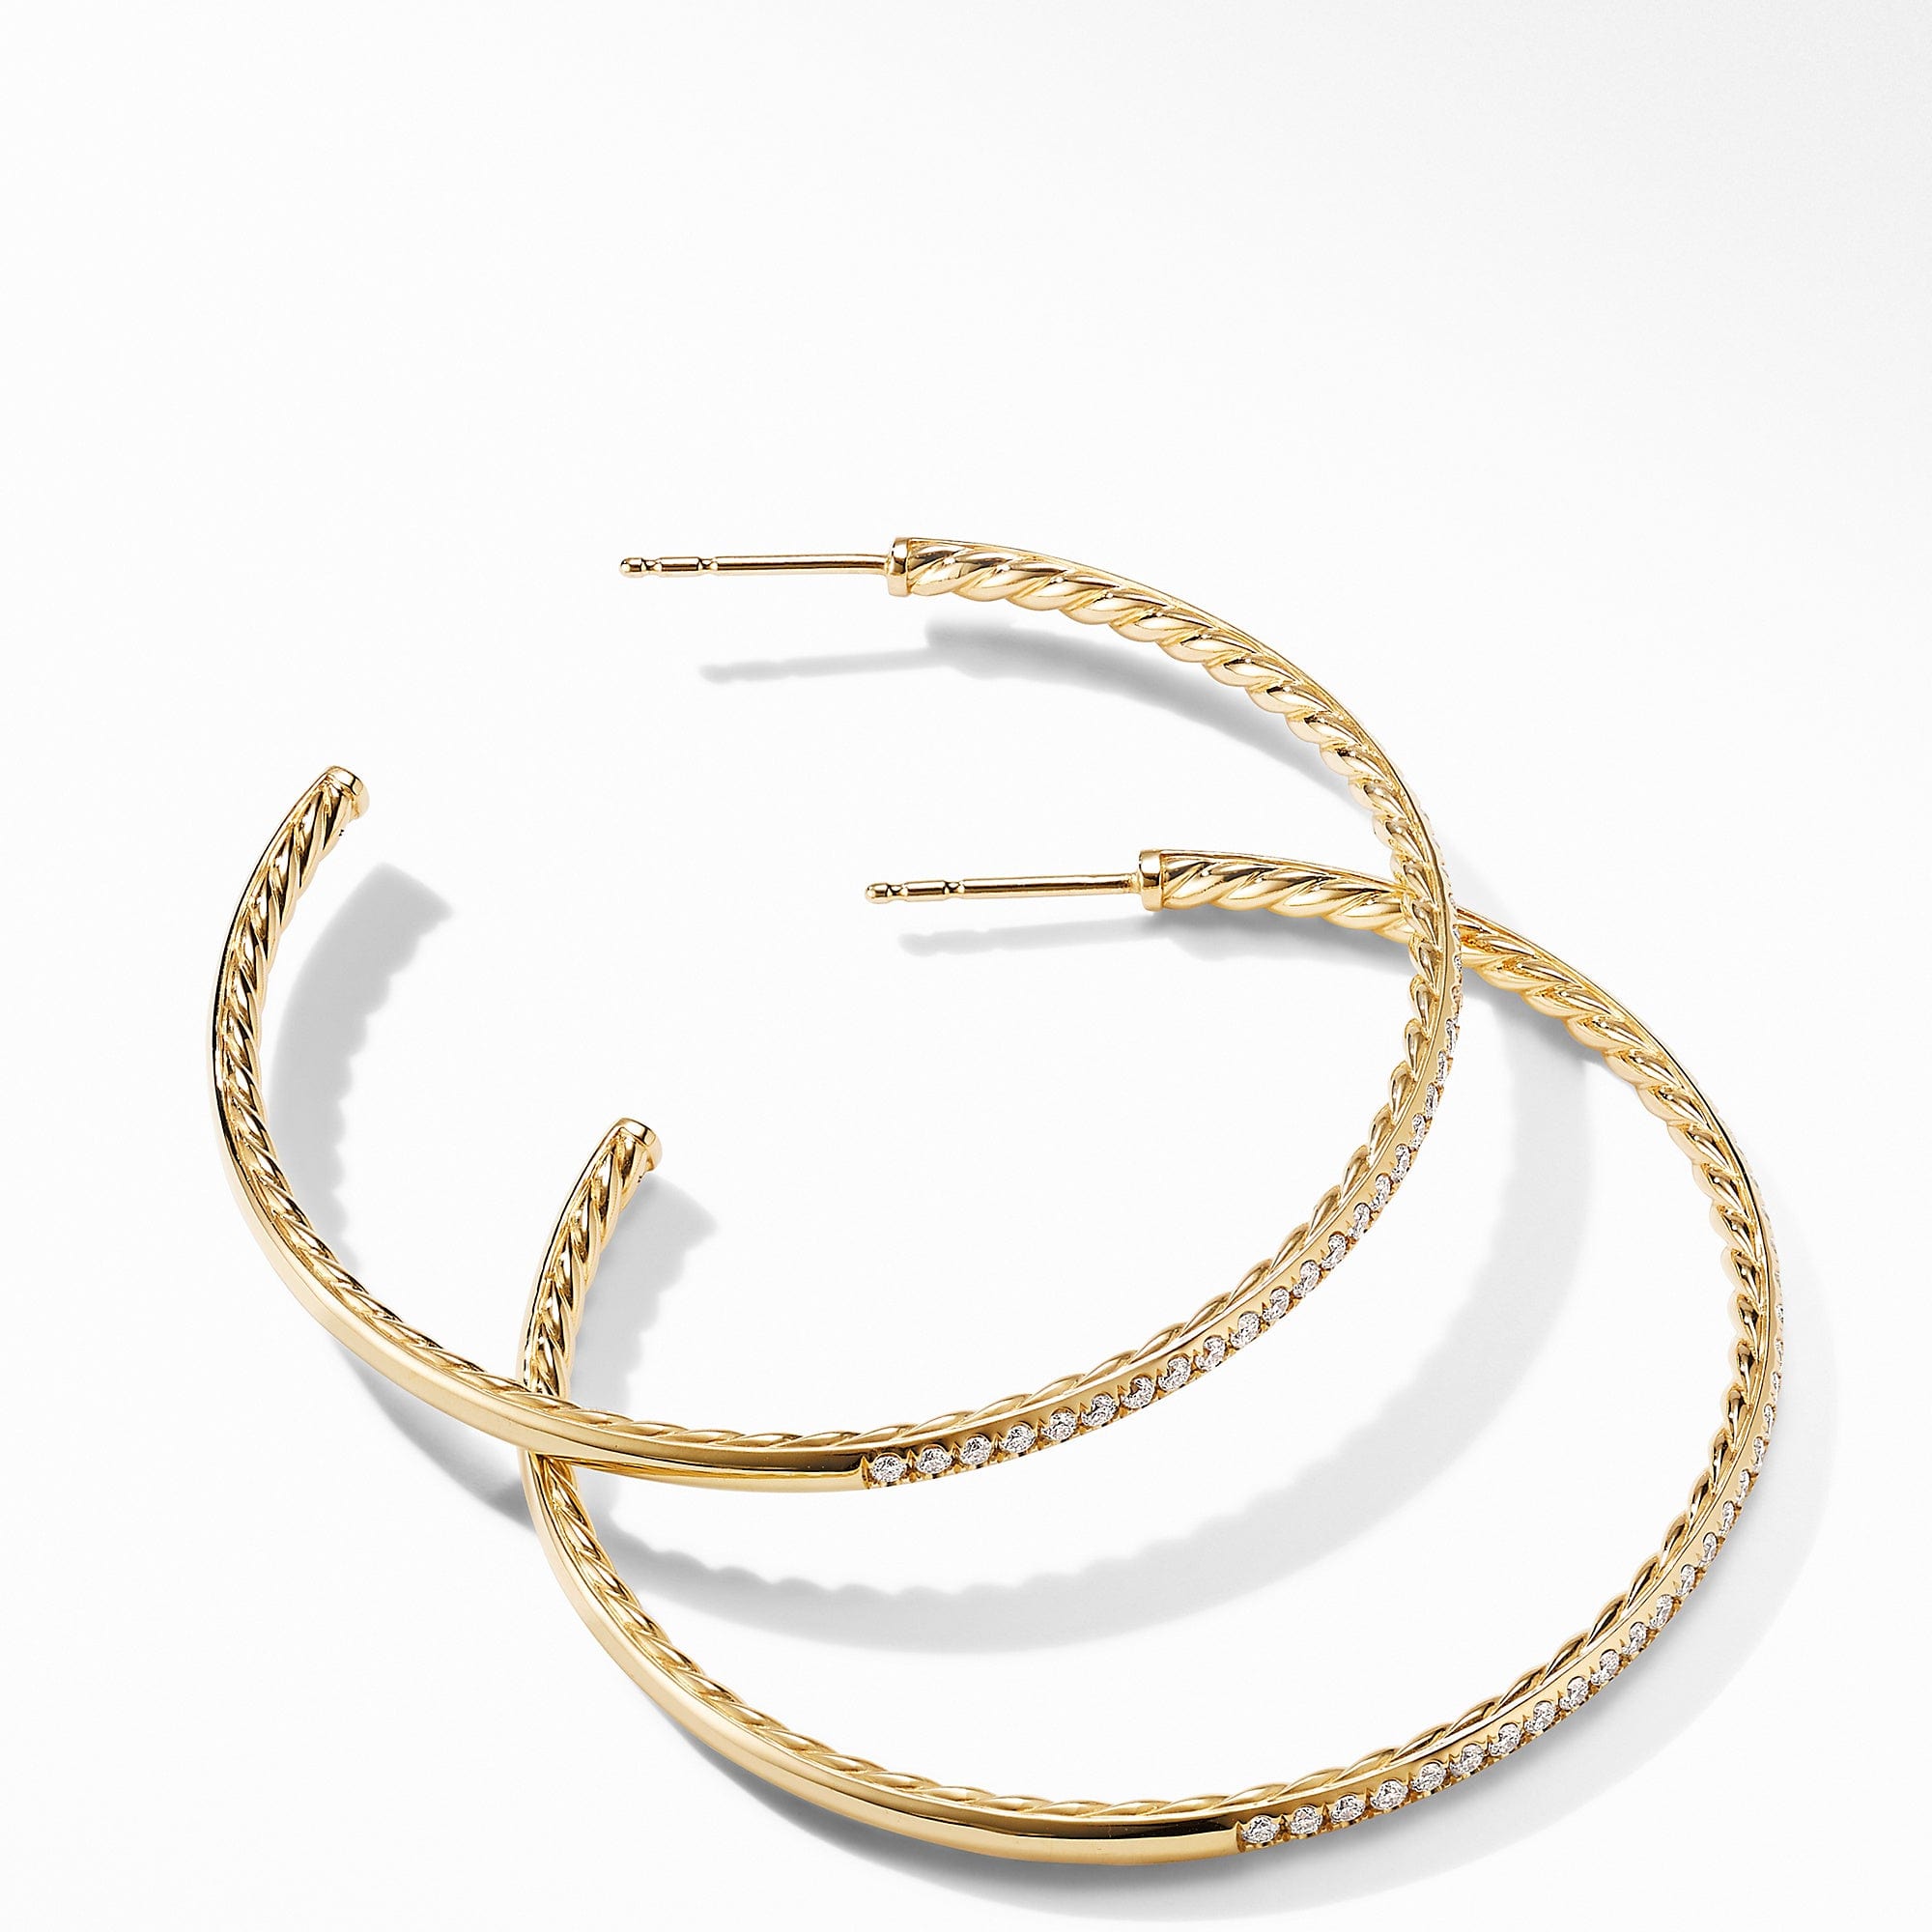 Large Hoop Earrings in 18K Yellow Gold with Pavé Diamonds